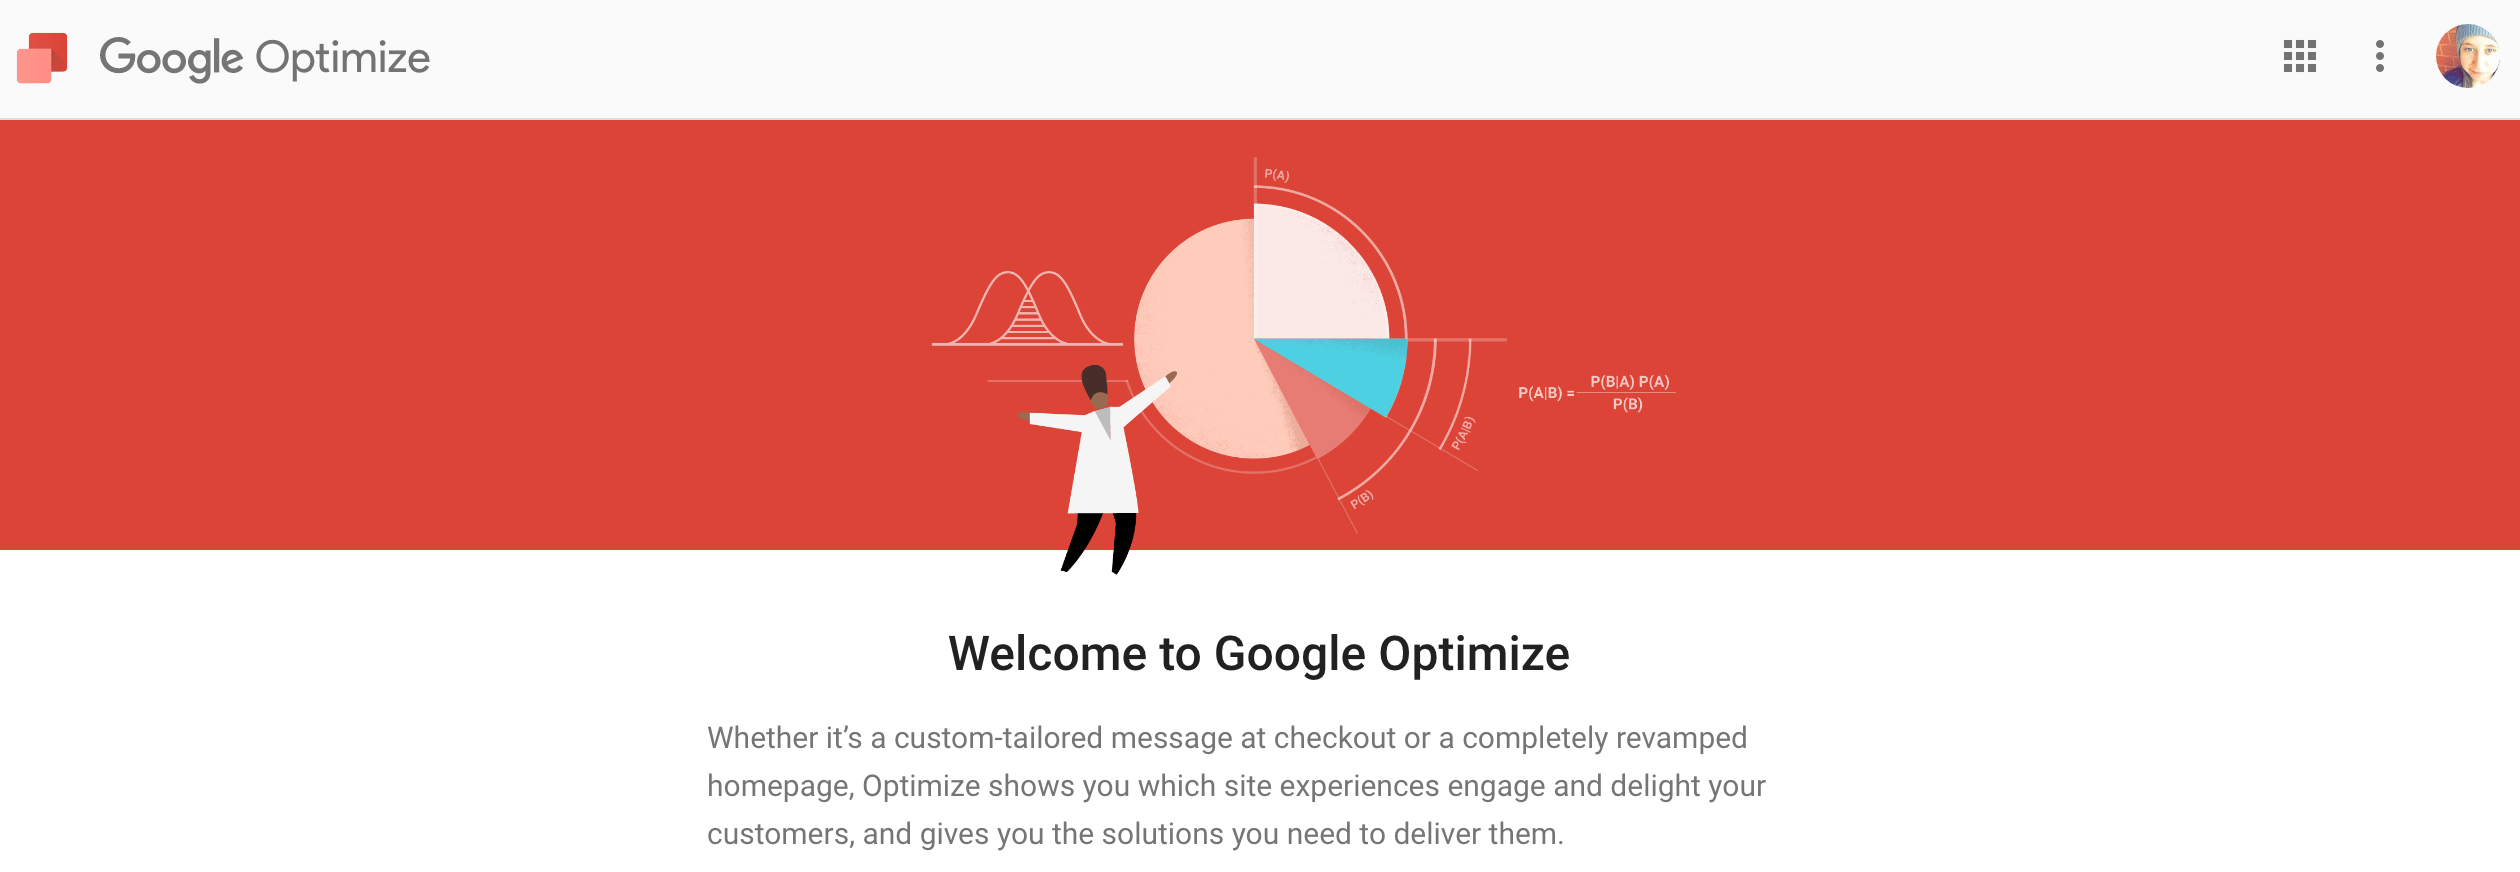 Welcome to Google Optimize